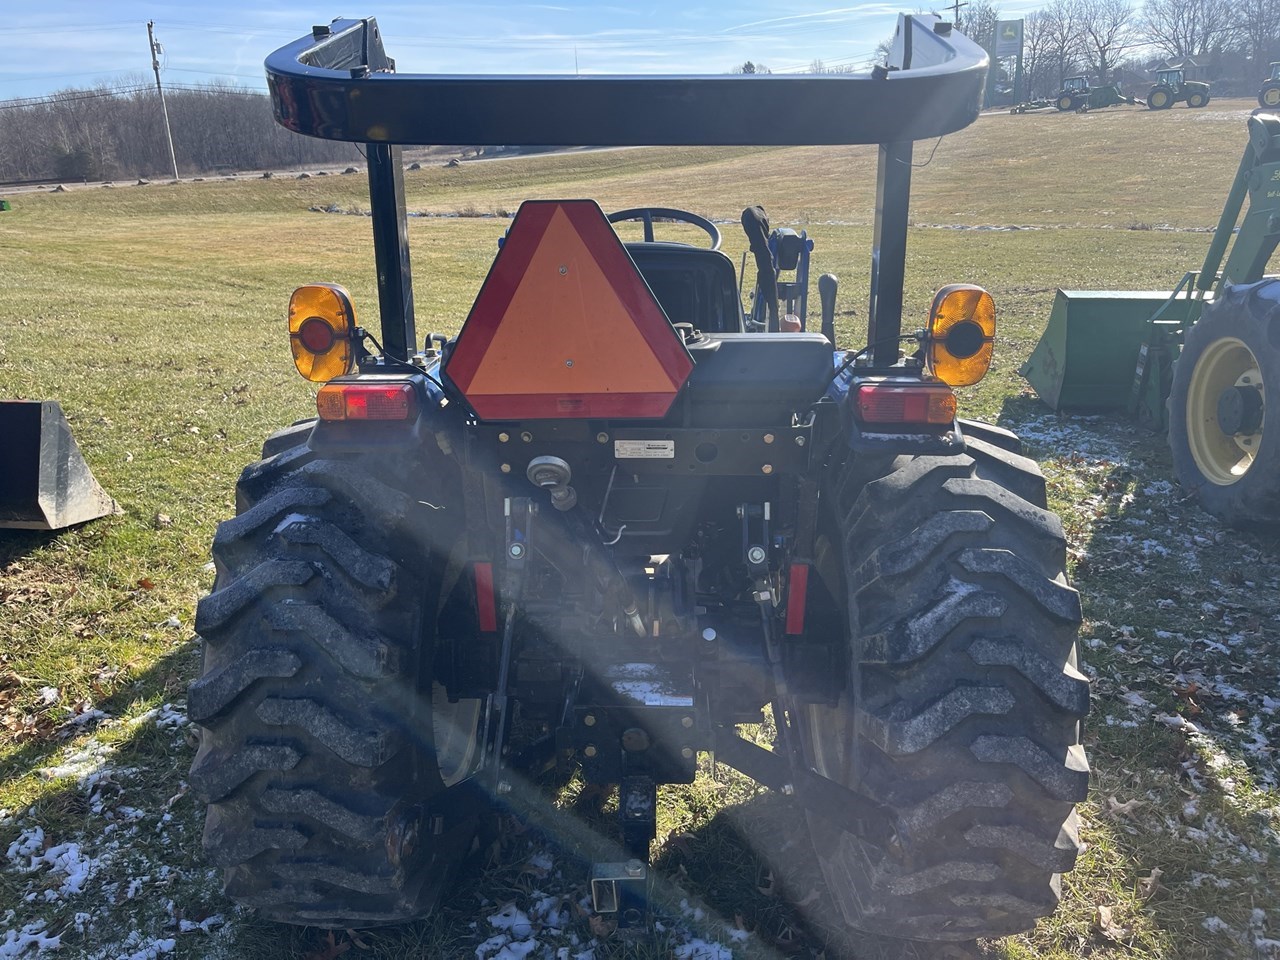 2021 New Holland Workmaster 35 Tractor - Compact Utility For Sale